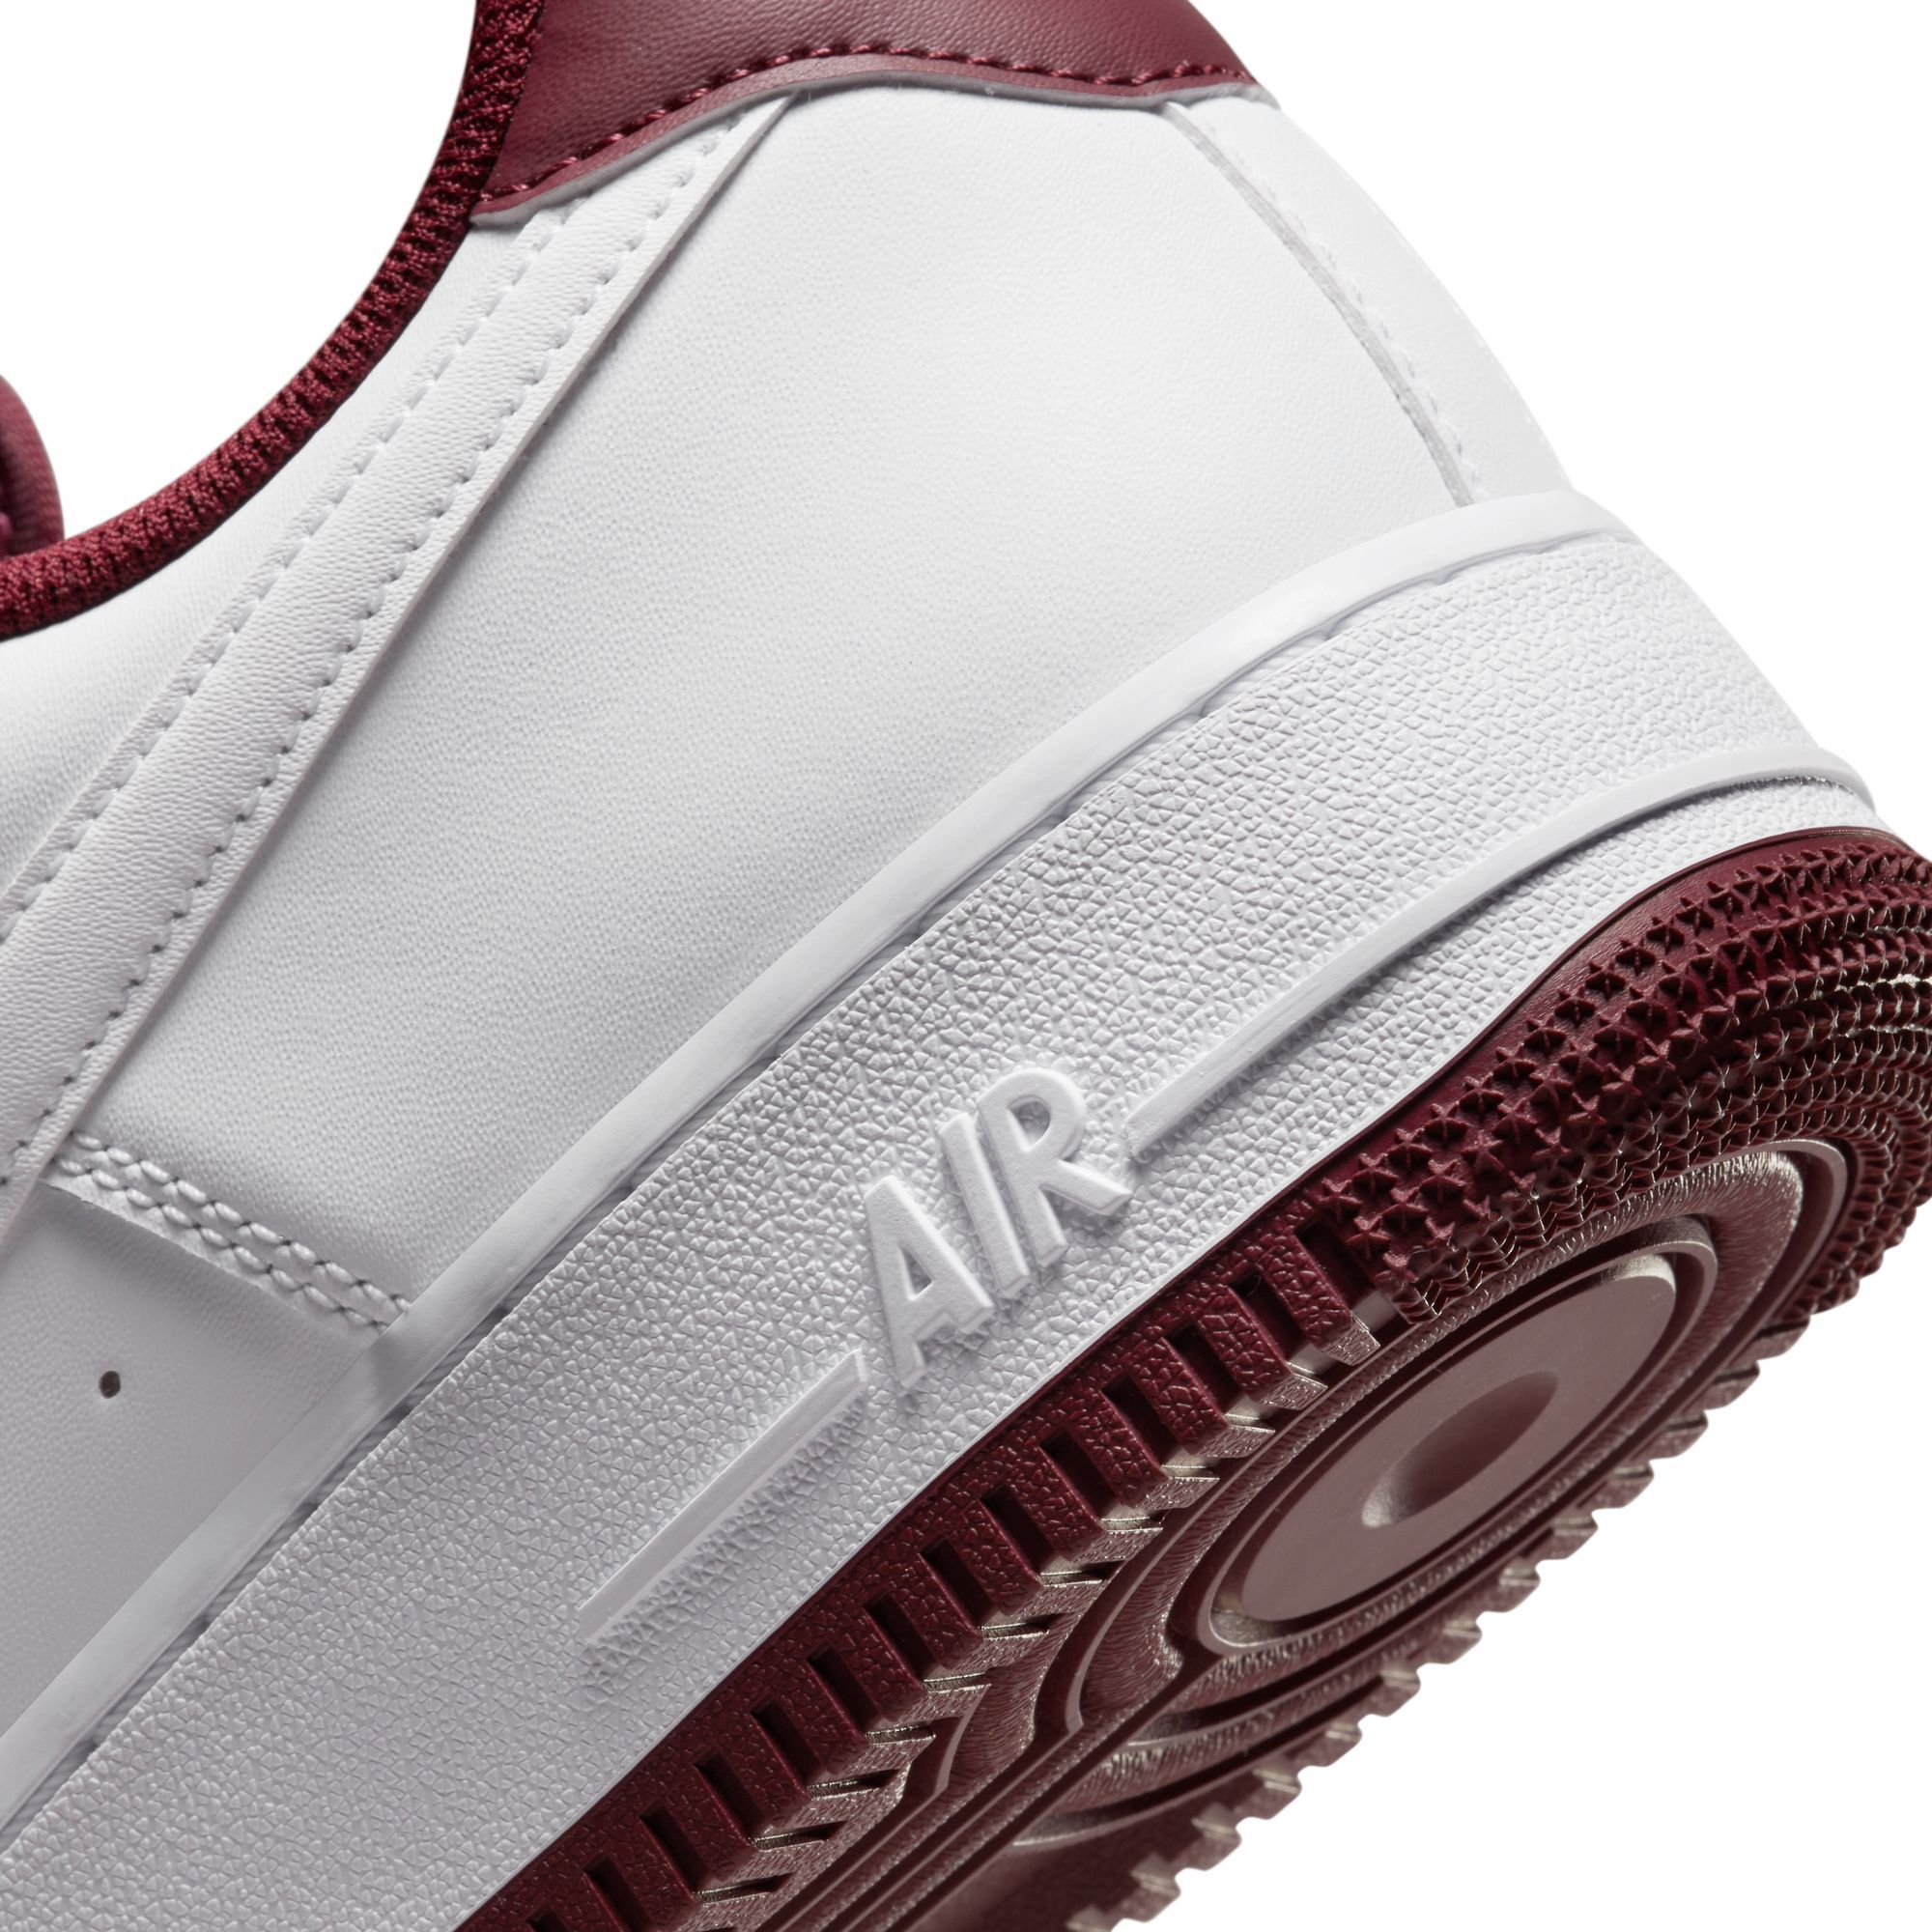 Nike Air Force 1 '07 Night Maroon Mens Lifestyle Shoes Maroon